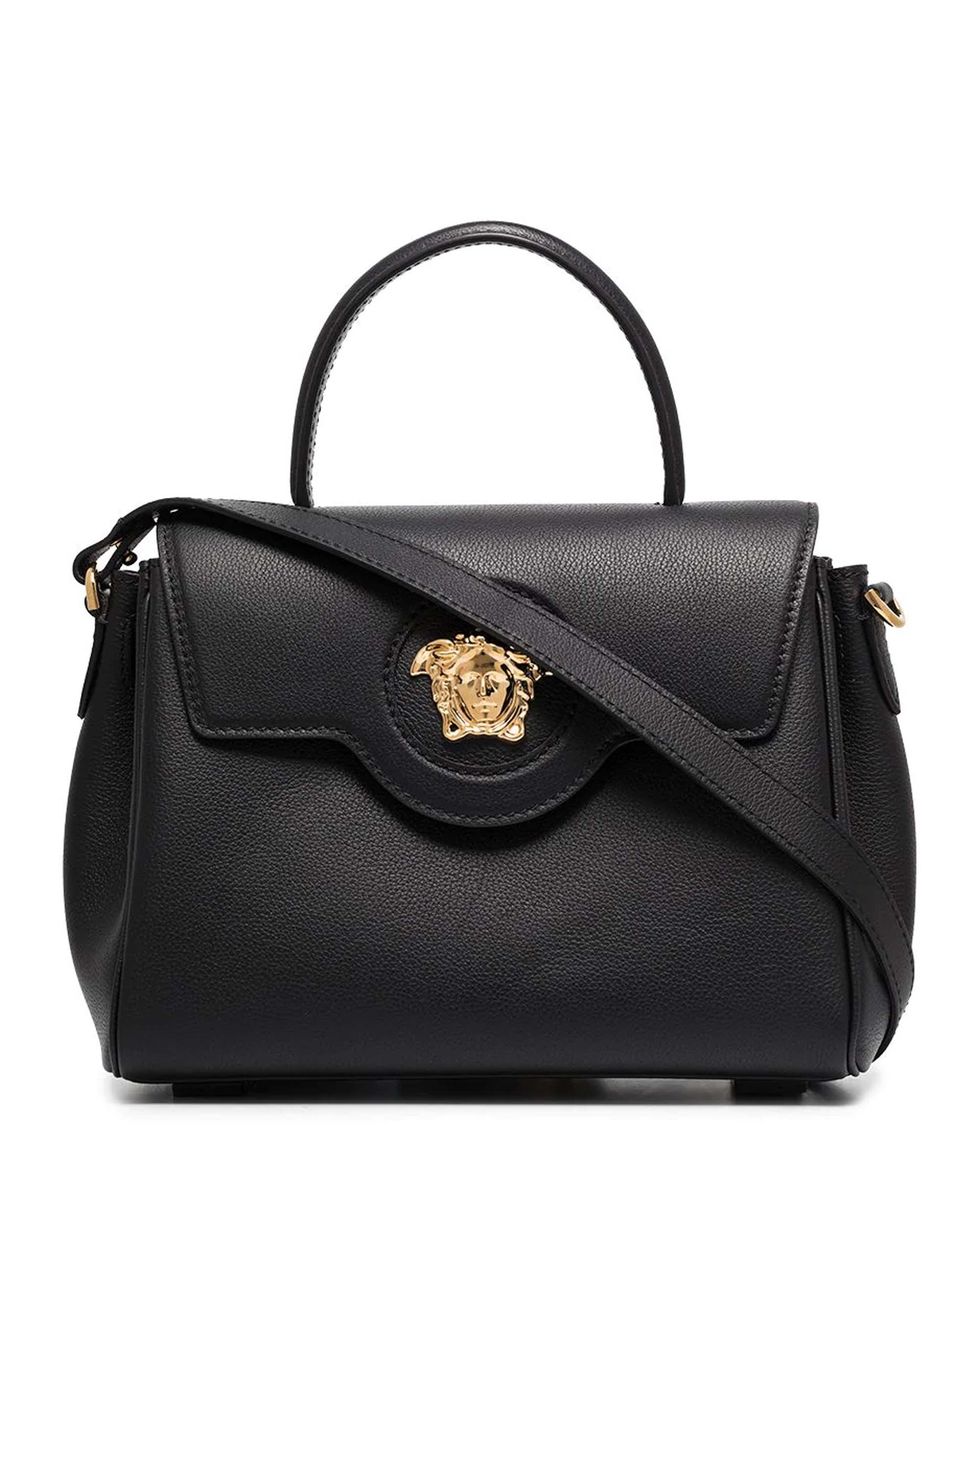 Classic designer handbags that will stand the test of time #designerha